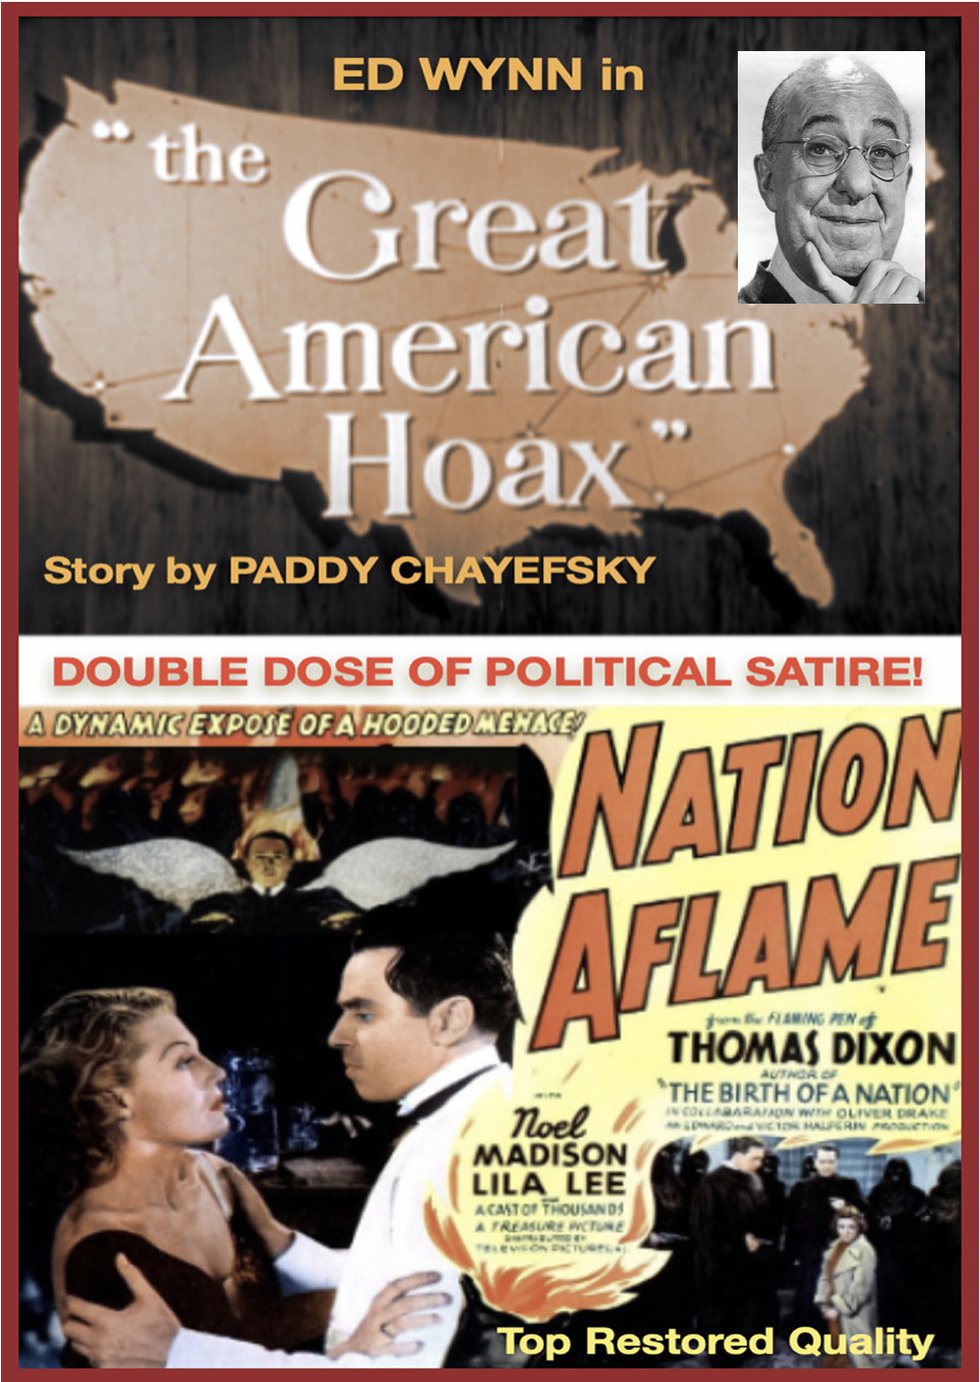 The Great American Hoax poster